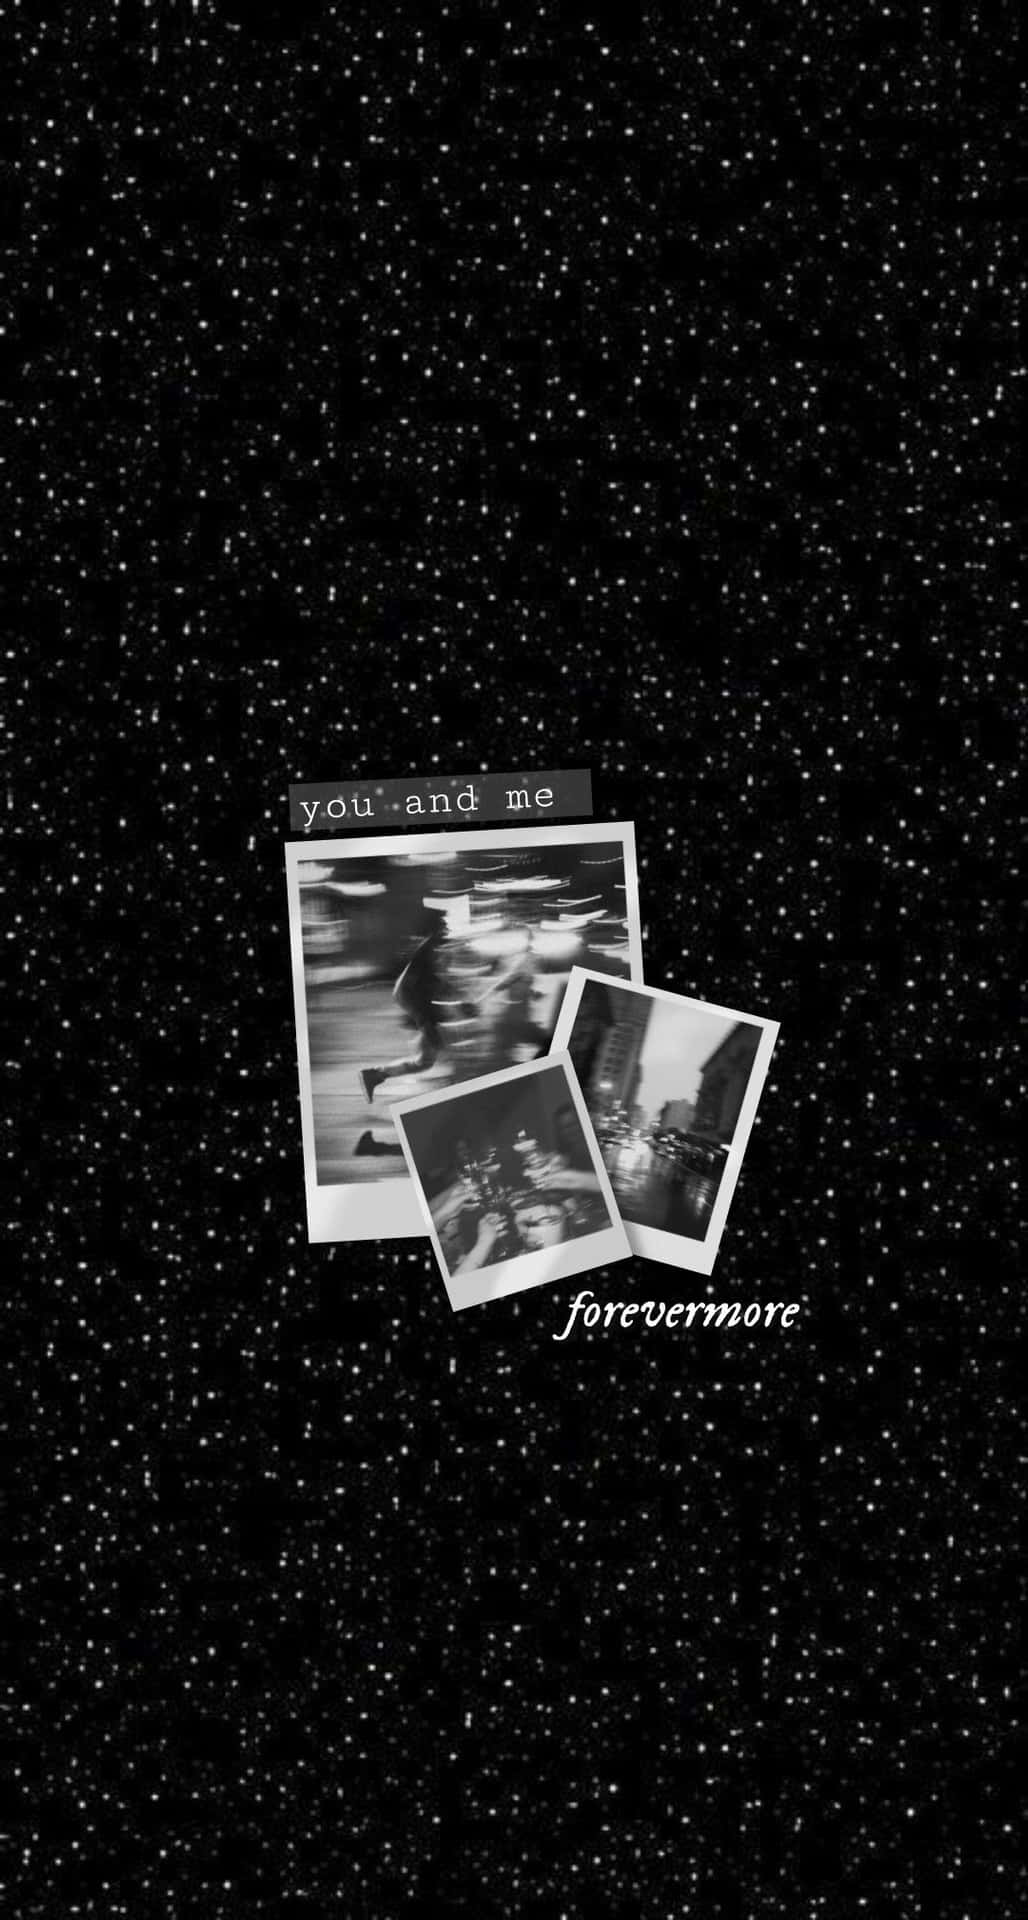 Aesthetic wallpaper phone background black and white you and me forevermore - Taylor Swift